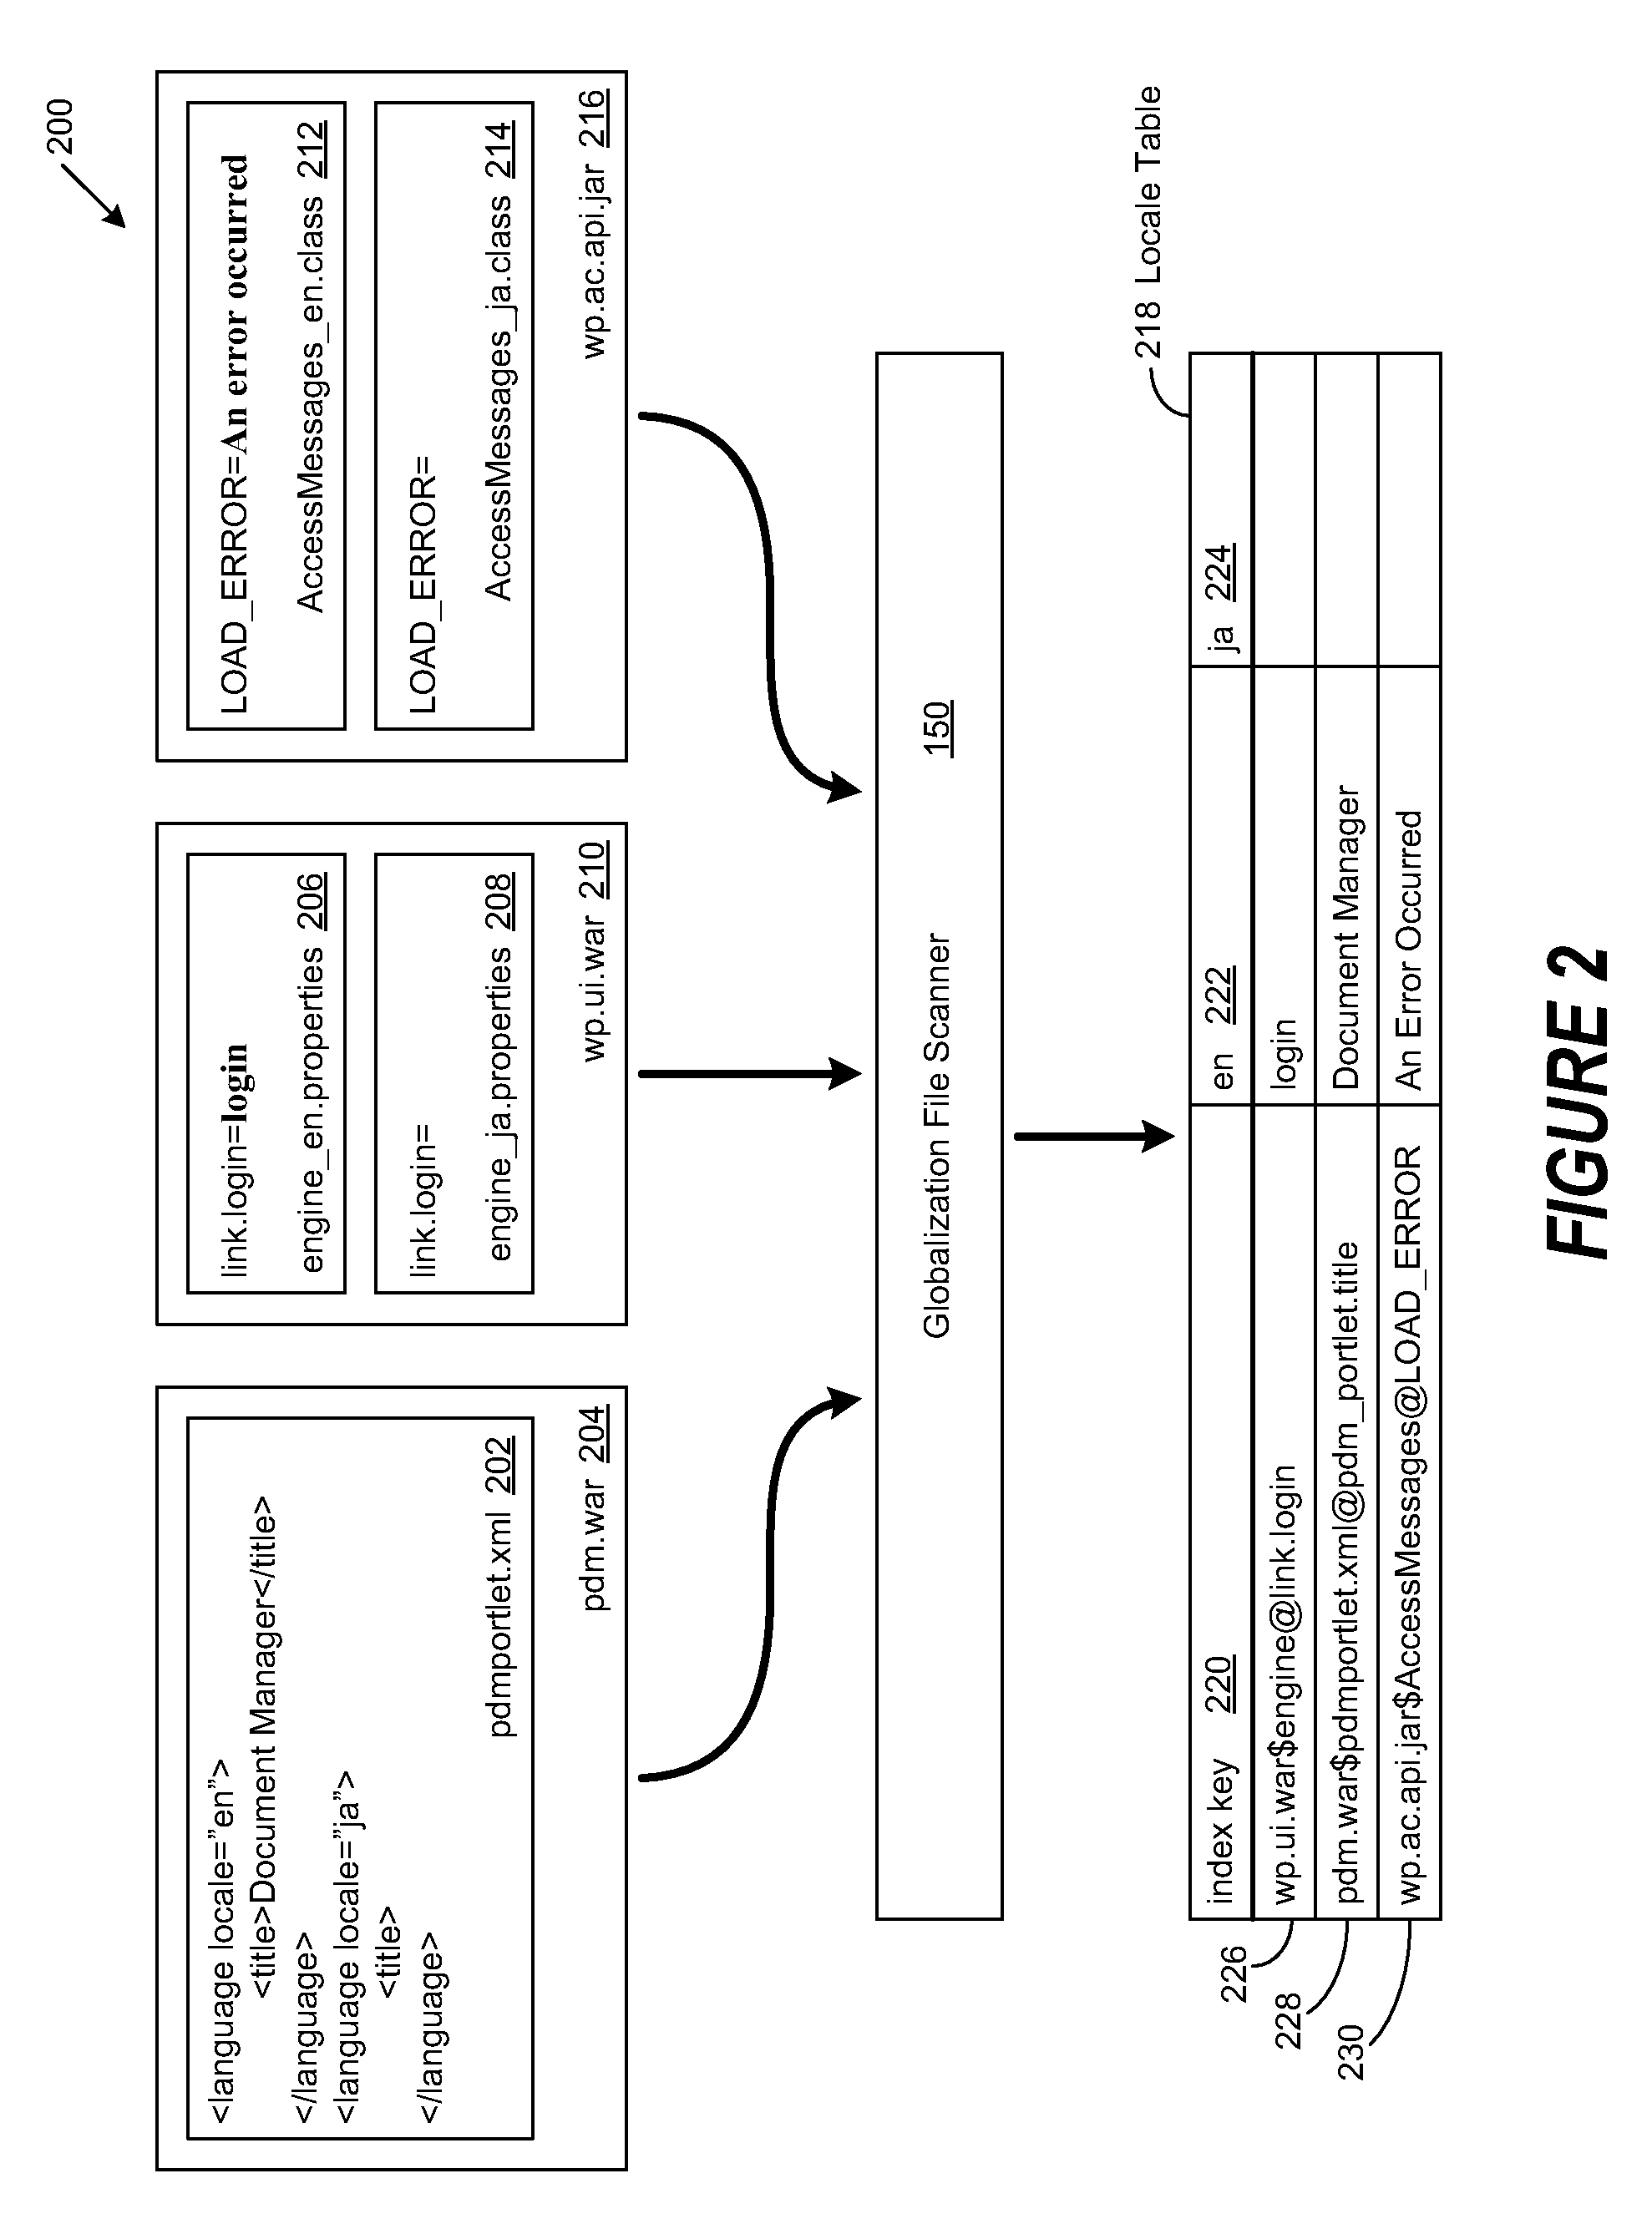 System and method to facilitate automatic globalization verification test